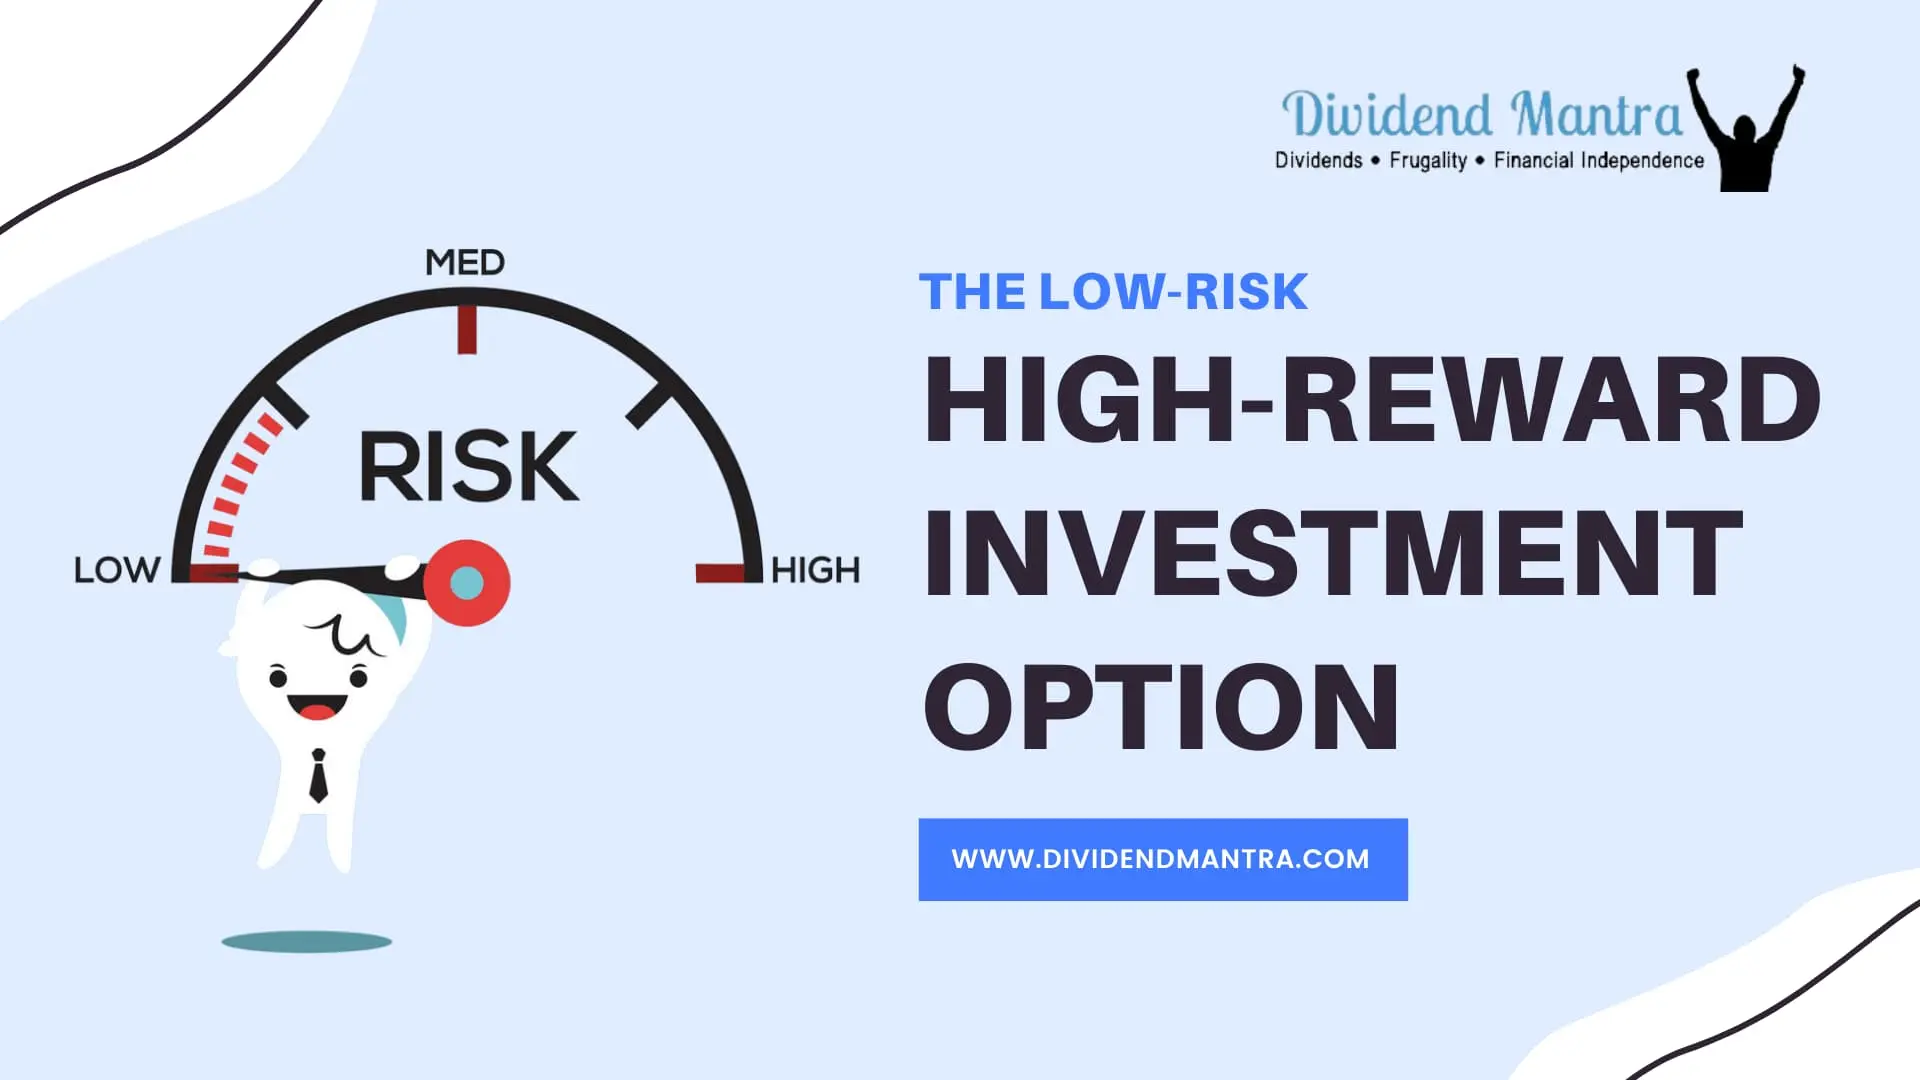 The Low-Risk, High-Reward Investment Option